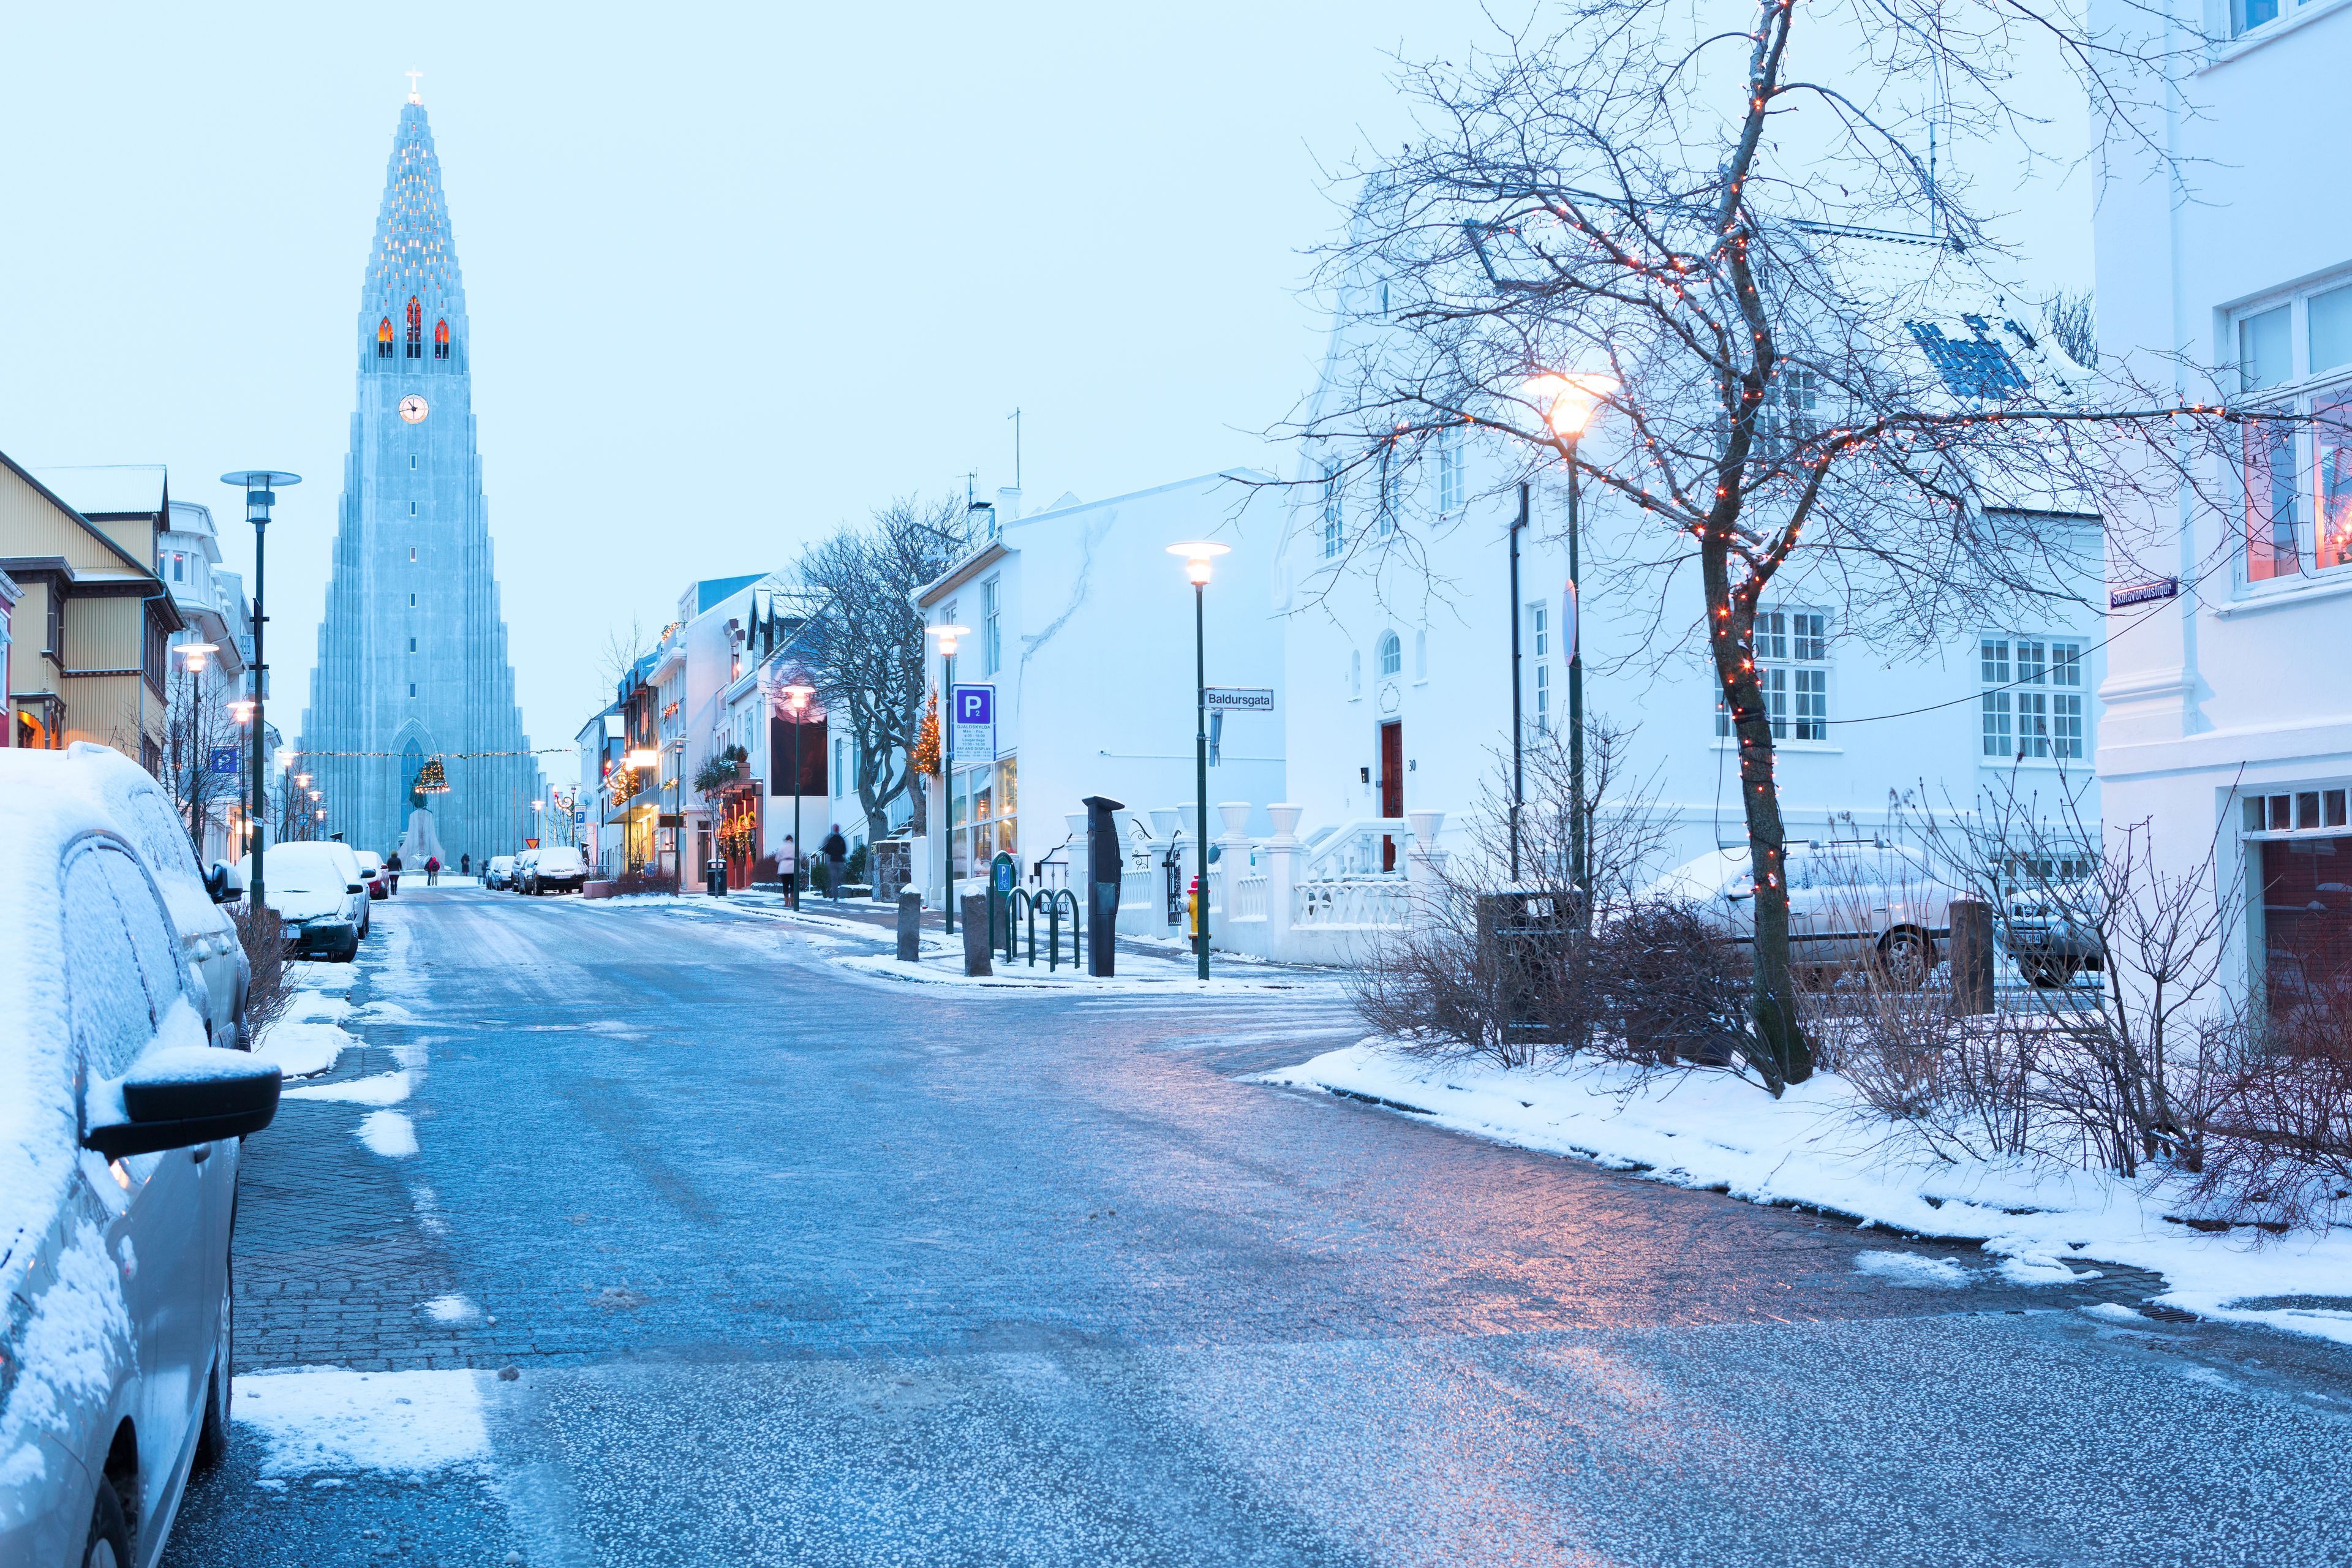 A view of a hotel in Reykjavik with festive decorations during winter months